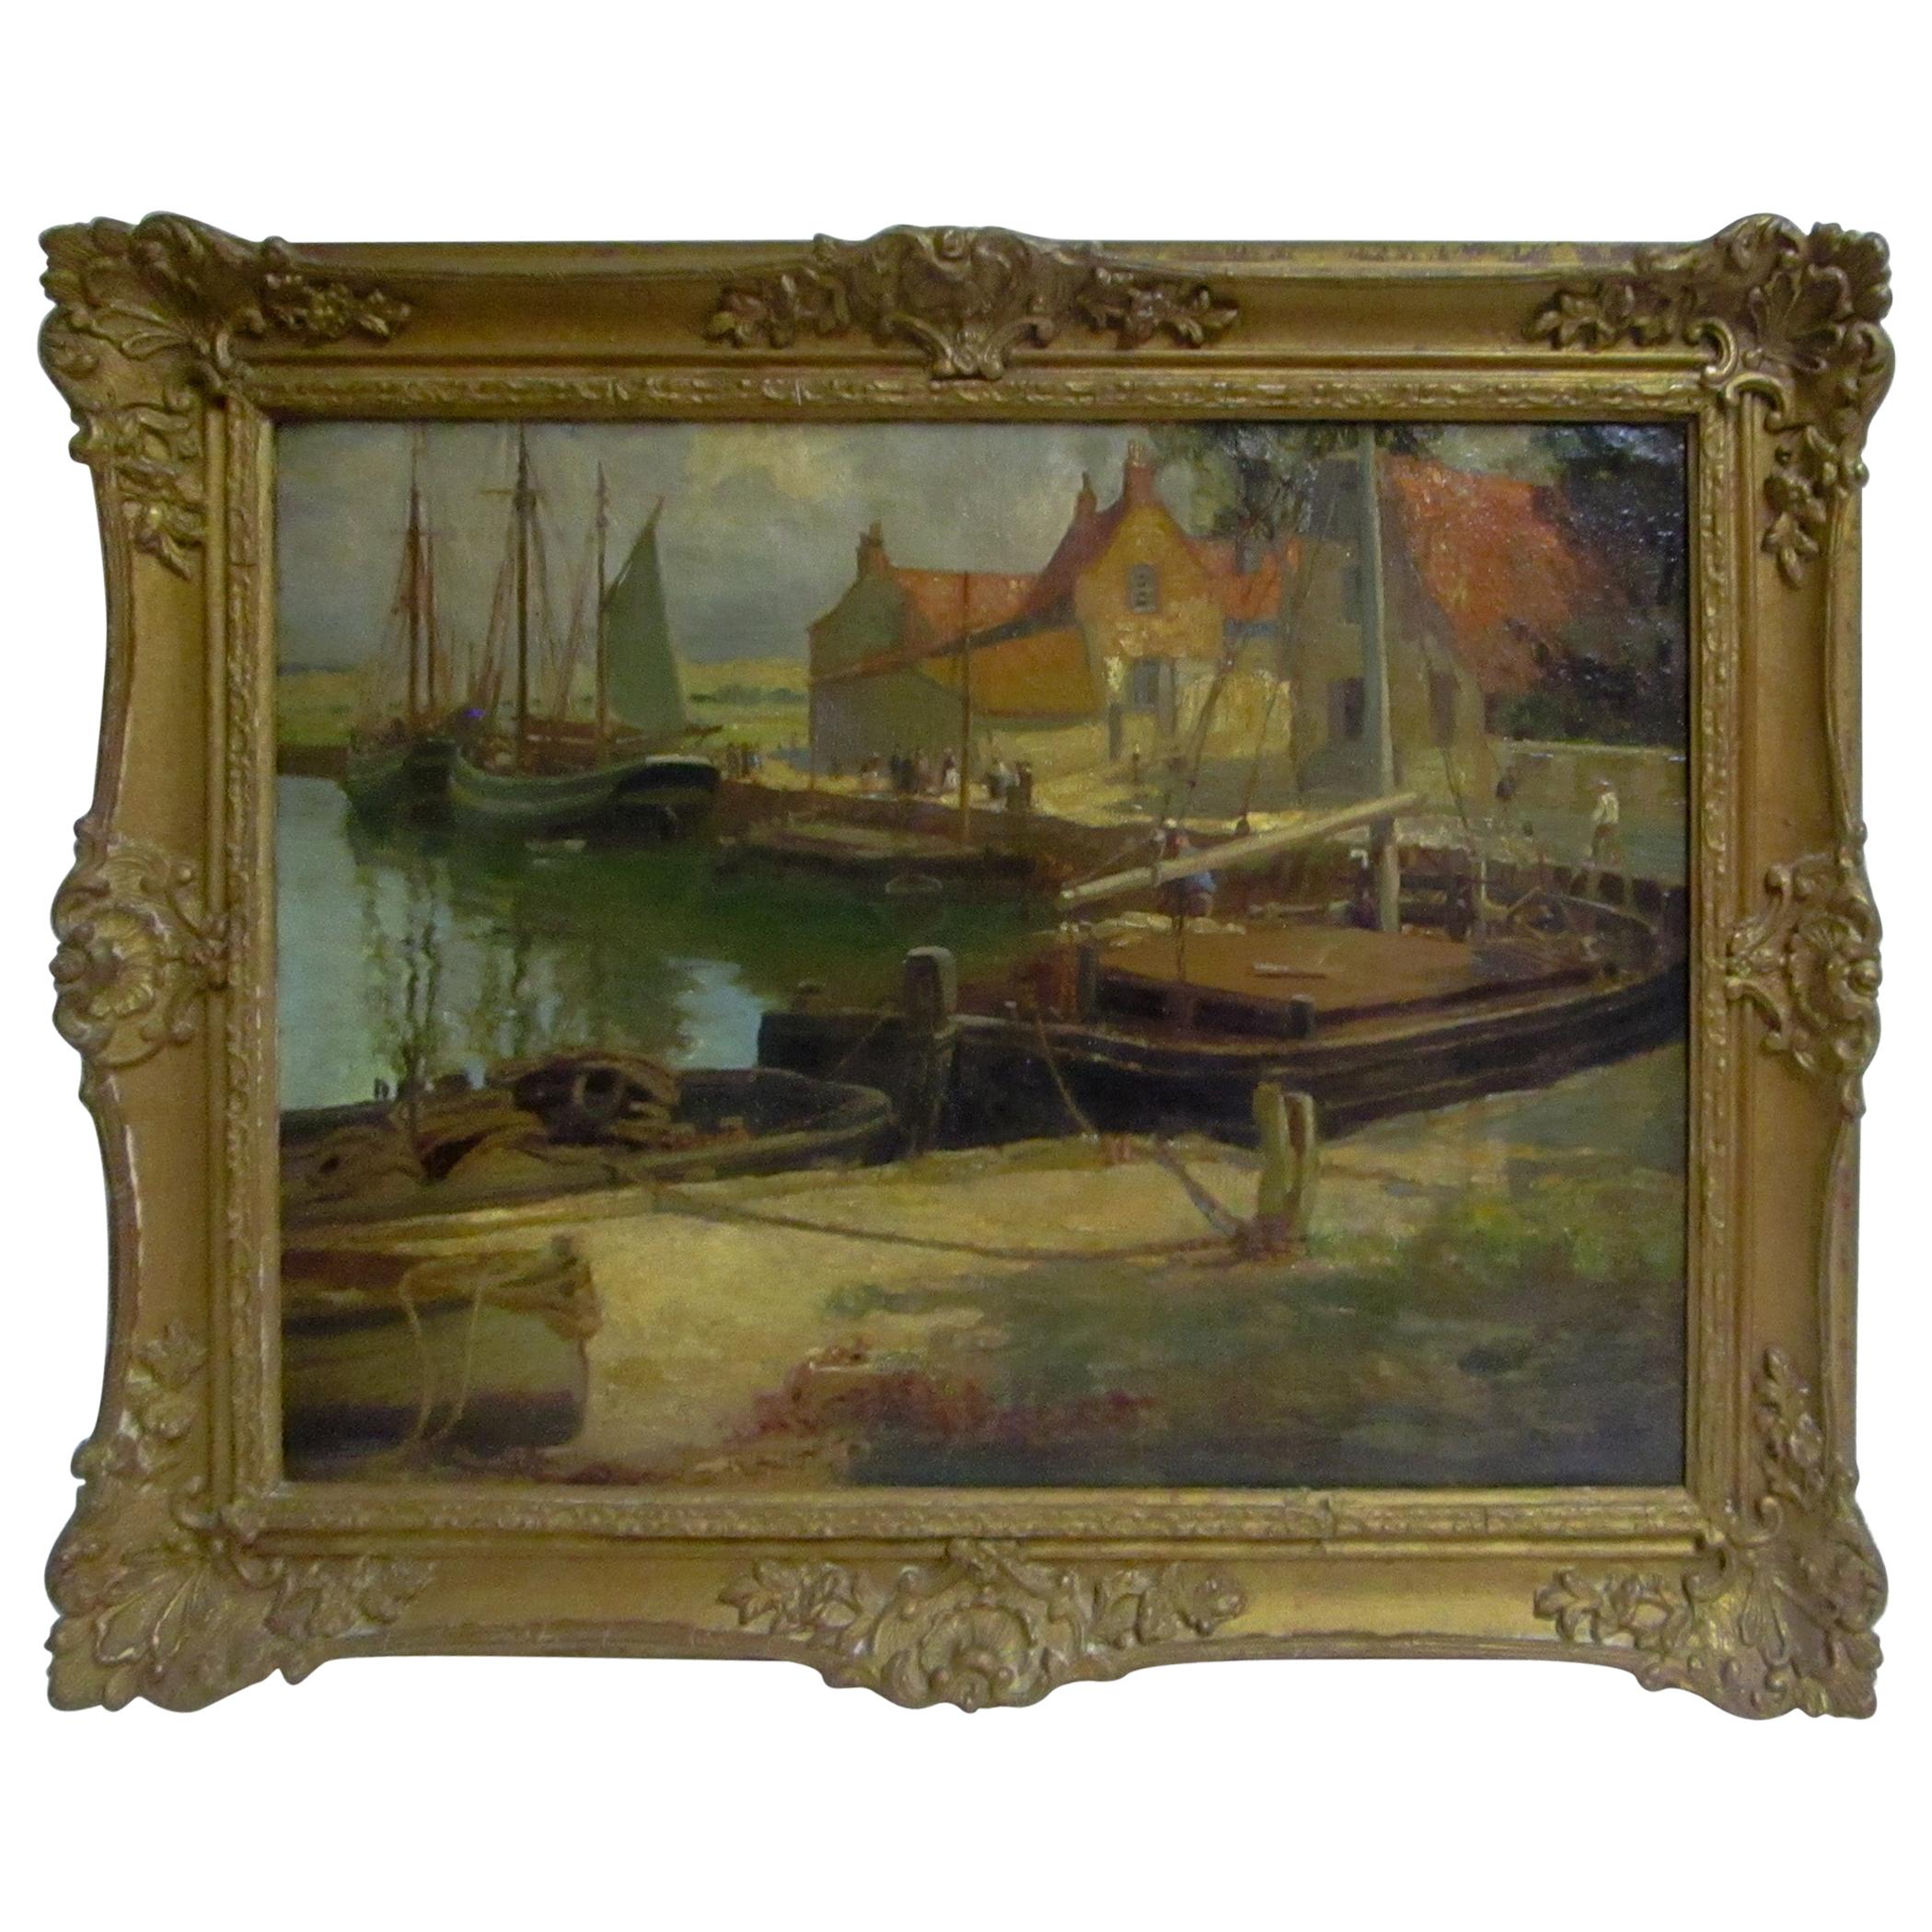 Early 20th c English School Oil Painting Dock & Fishing Boats by Frederick Stead